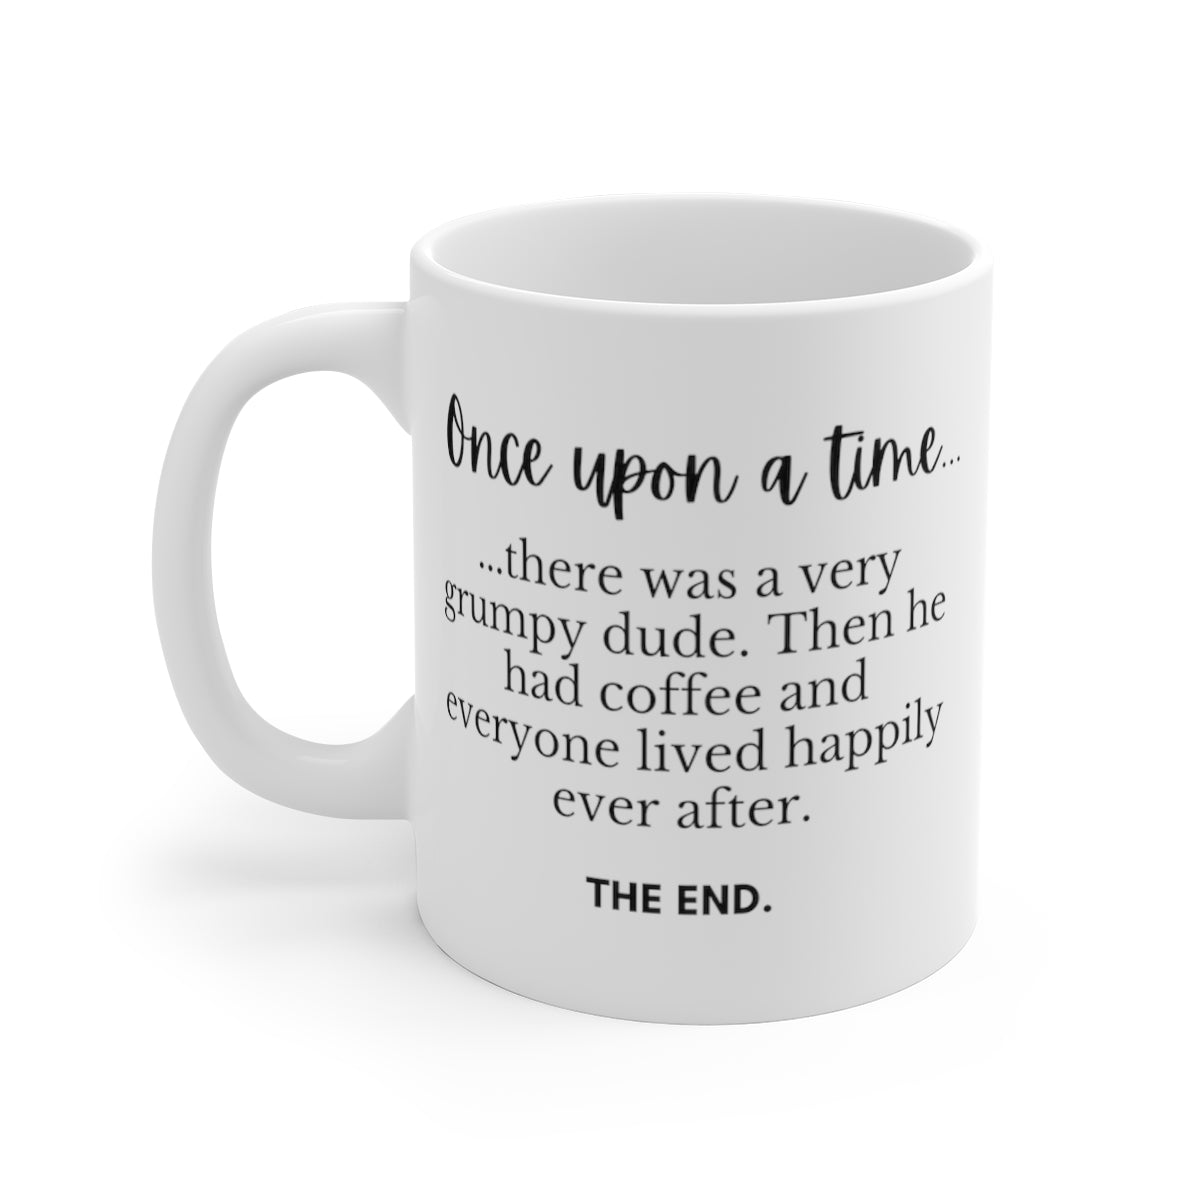 Once Upon A Time There Was A Very Grumpy Dude. Then He Had Coffee... | Funny Mug for Coffee Lovers | Mug 11oz